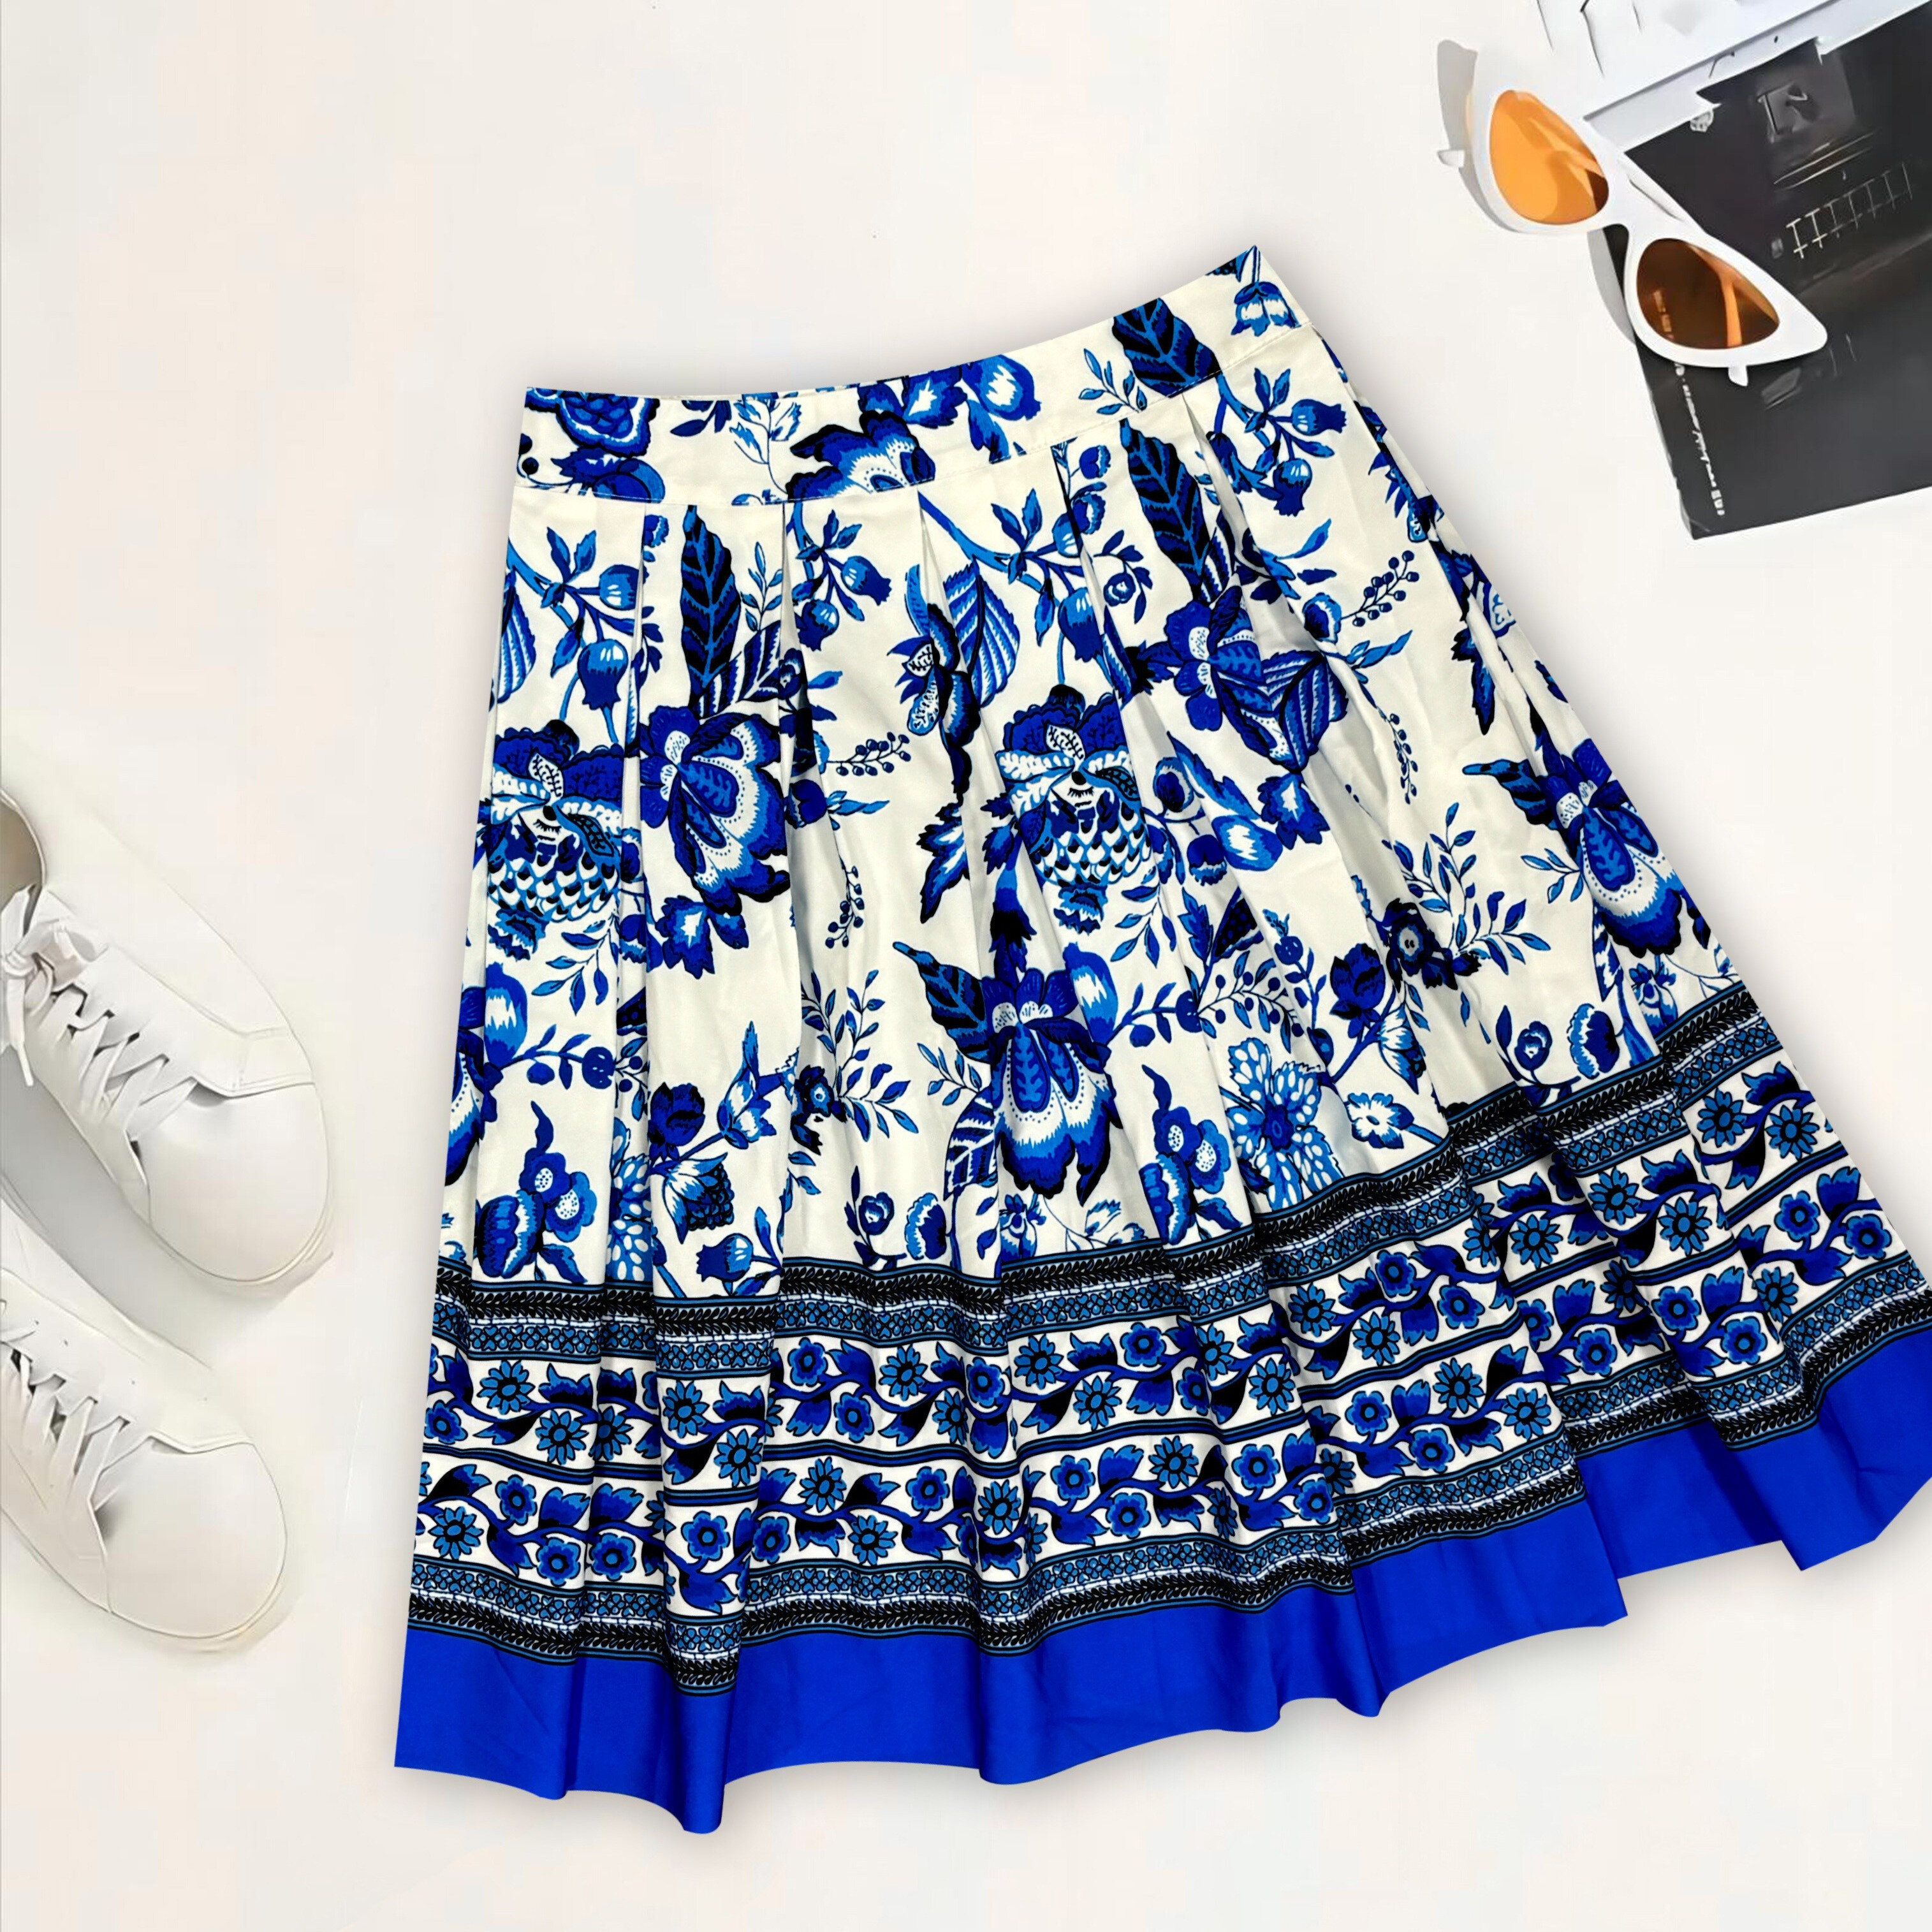 

Women's Casual High-waisted Tennis Skirt, Floral Print, A-line Sports Skirt, Blue And White